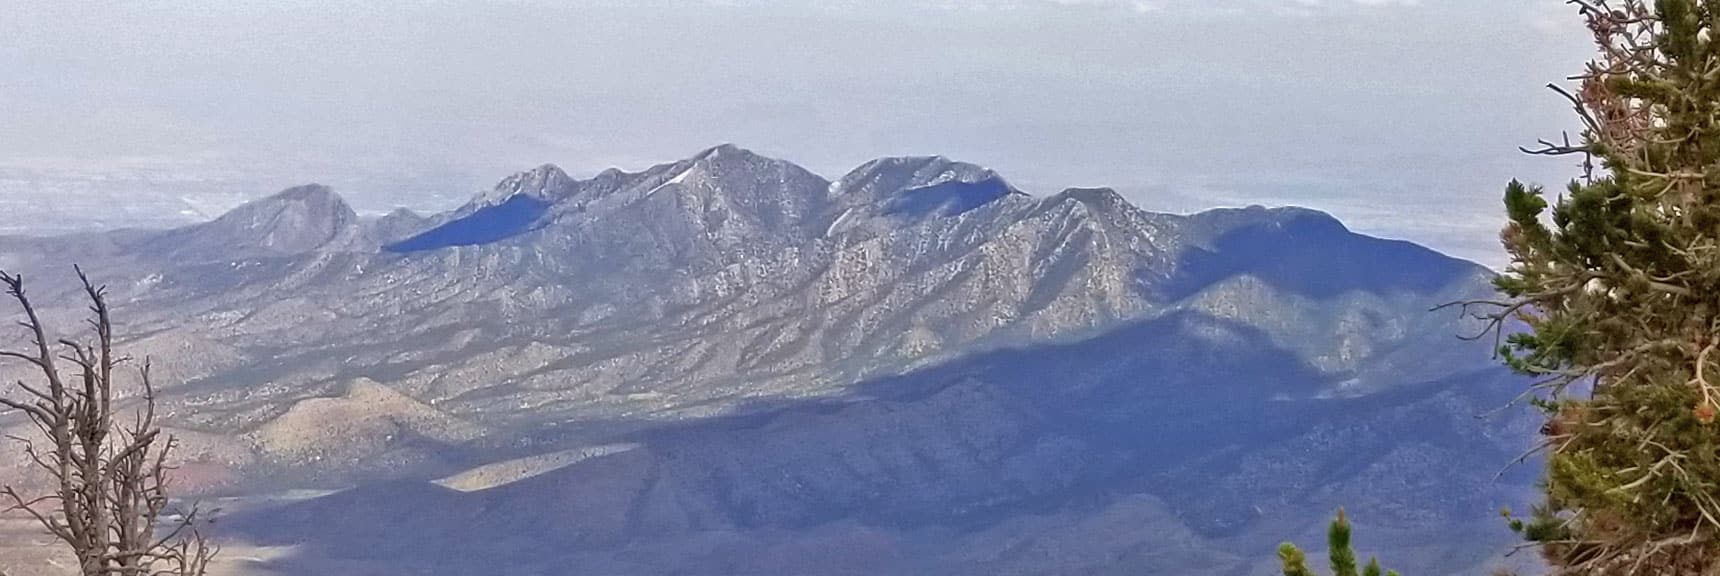 La Madre Mountain Viewed from Harris Mountain Summit | Six Peak Circuit Adventure in the Spring Mountains, Nevada